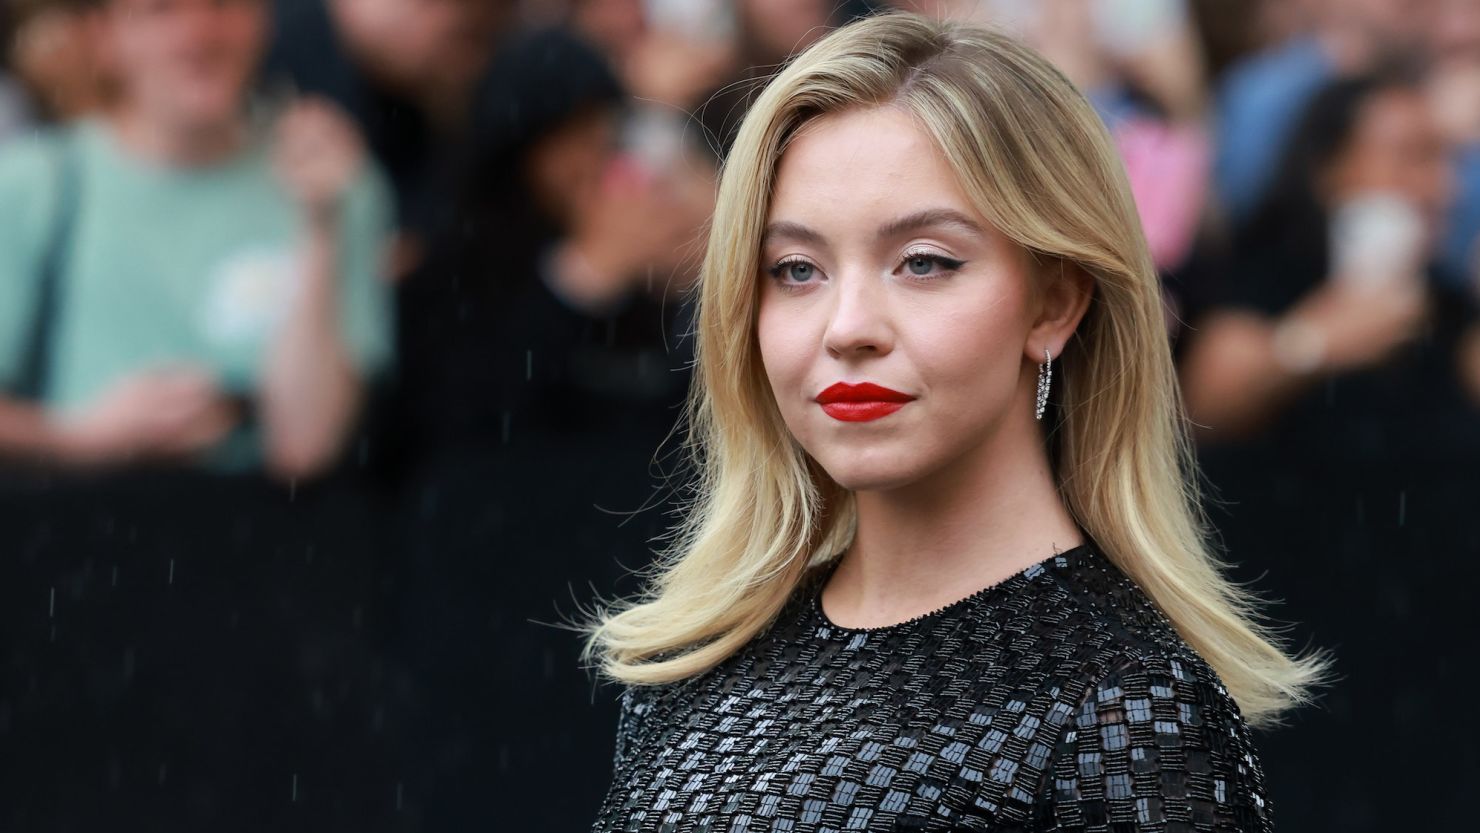 Sydney Sweeney attends the Giorgio Armani Privé Haute Couture Fall/Winter 2023/2024 show as part of Paris Fashion Week on July 4, 2023 in Paris, France.